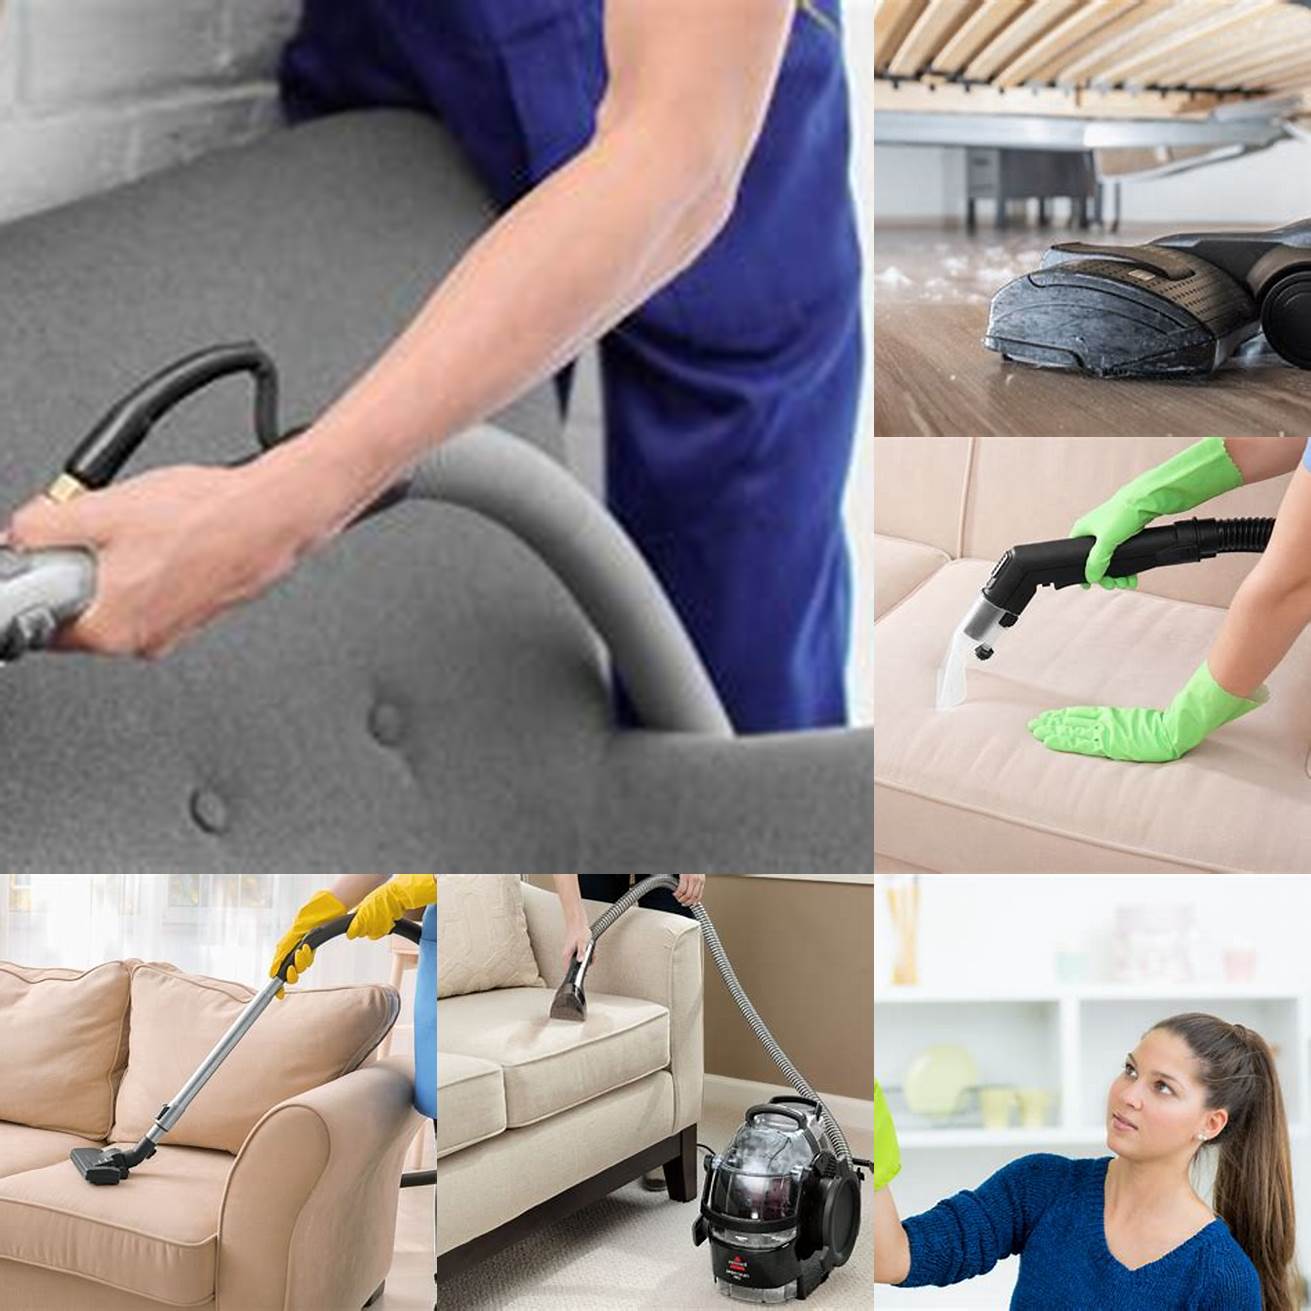 Vacuum or dust your upholstered bed regularly to remove dust and dirt